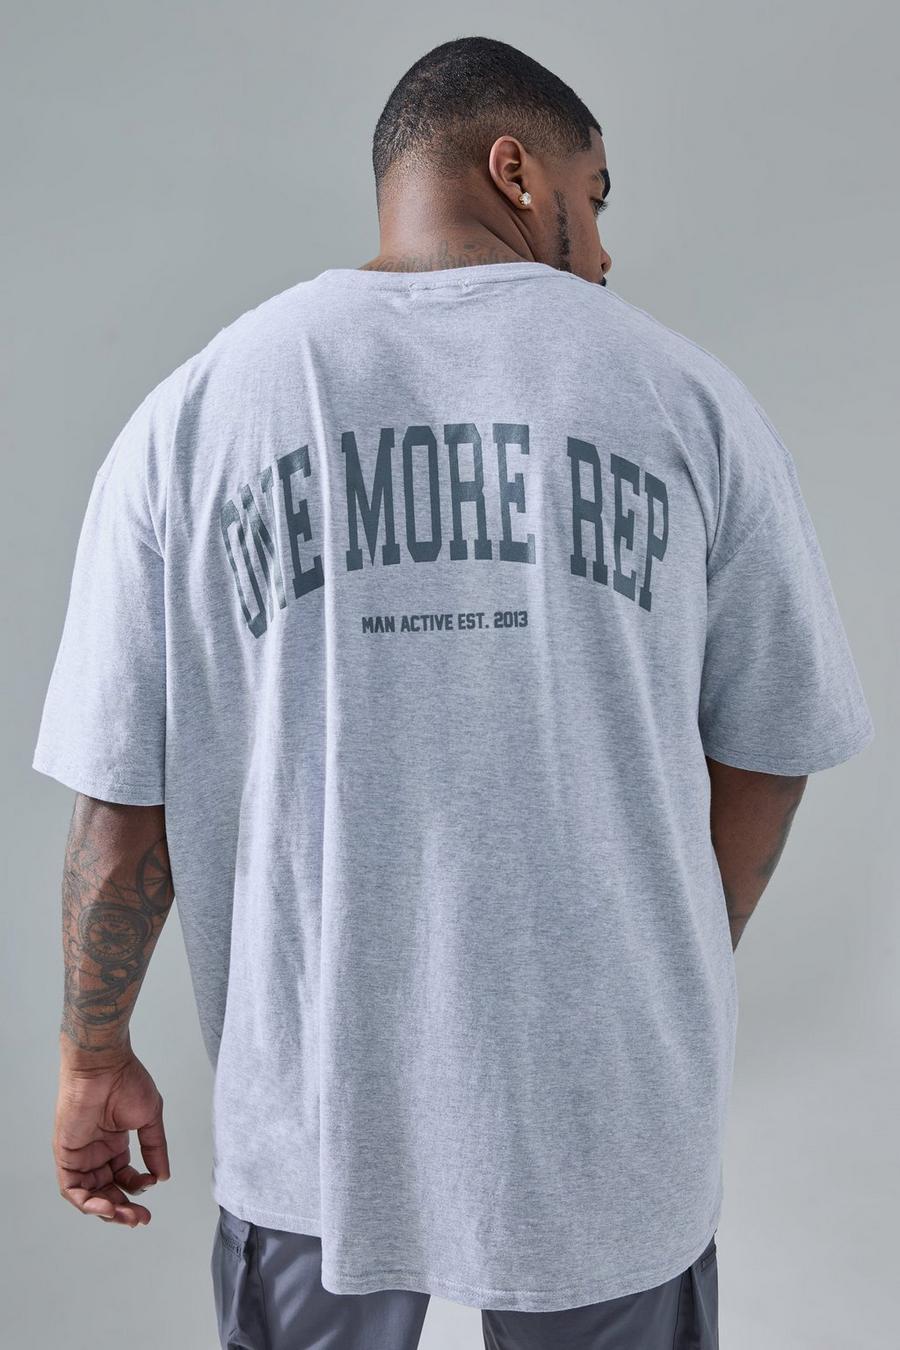 Grey marl Plus MAN Active One More Rep Oversize t-shirt